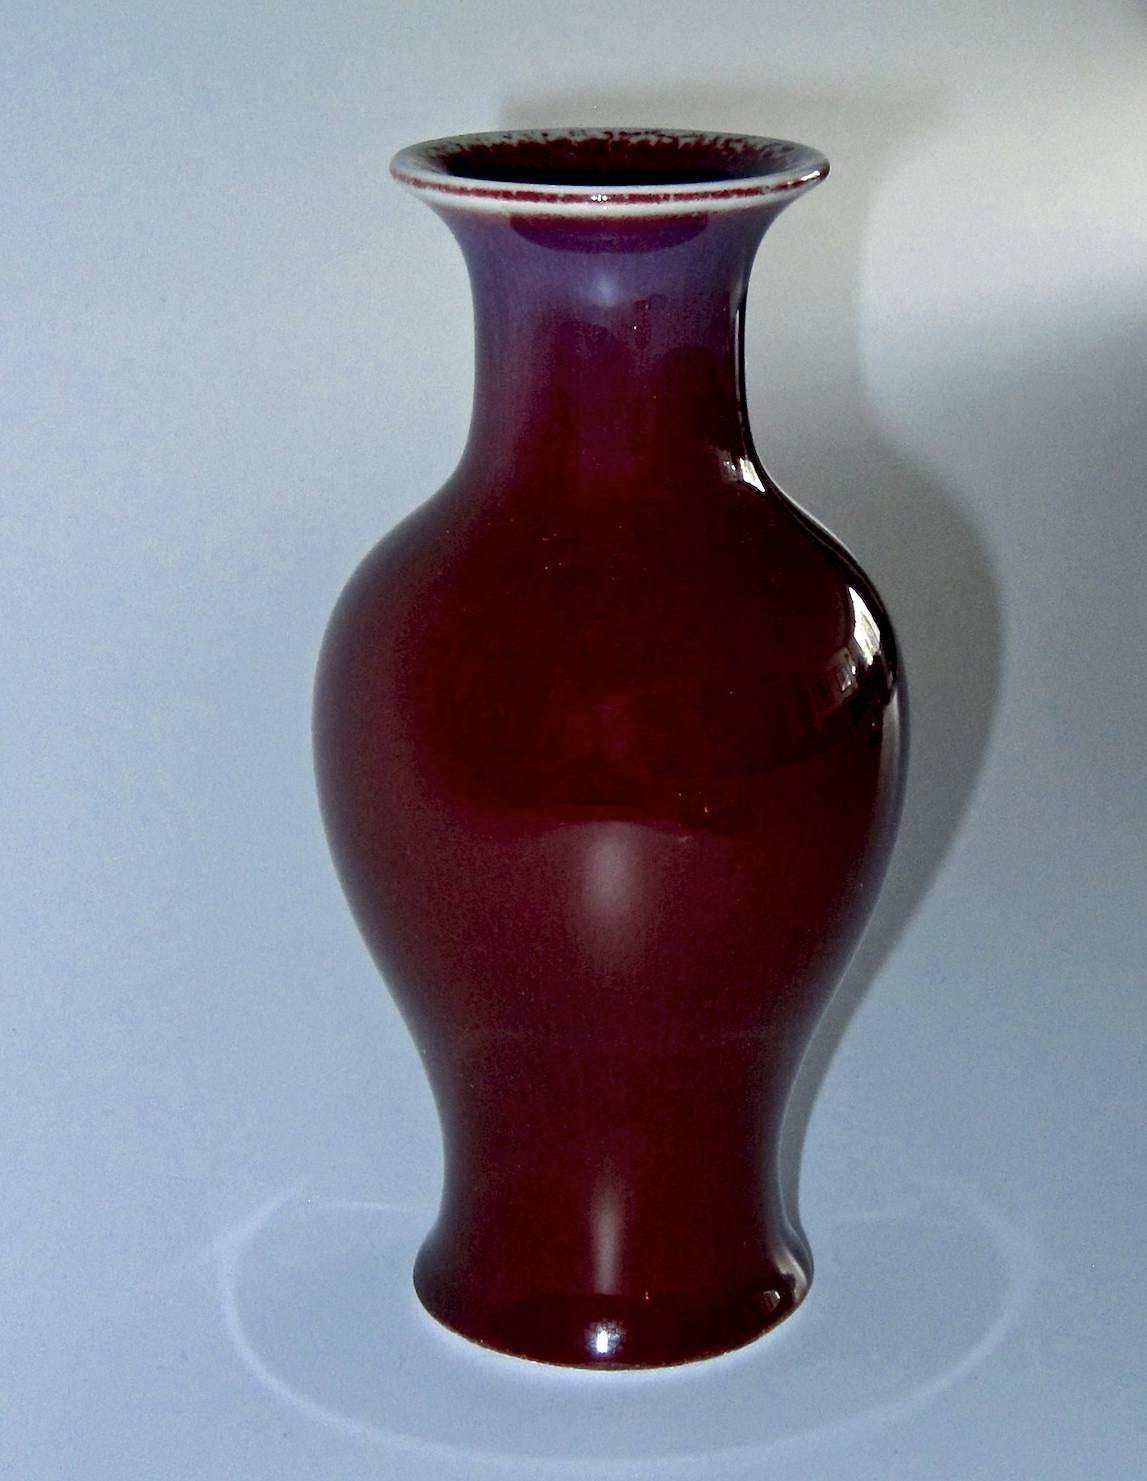 An antique Chinese vase manufactured circa 1880-1926 during the late Qing dynasty at Jingdezhen. The porcelain baluster form vase is decorated with a Sang de Boeuf / Oxblood flambé glaze with shades of blue / indigo around the neck. Excellent